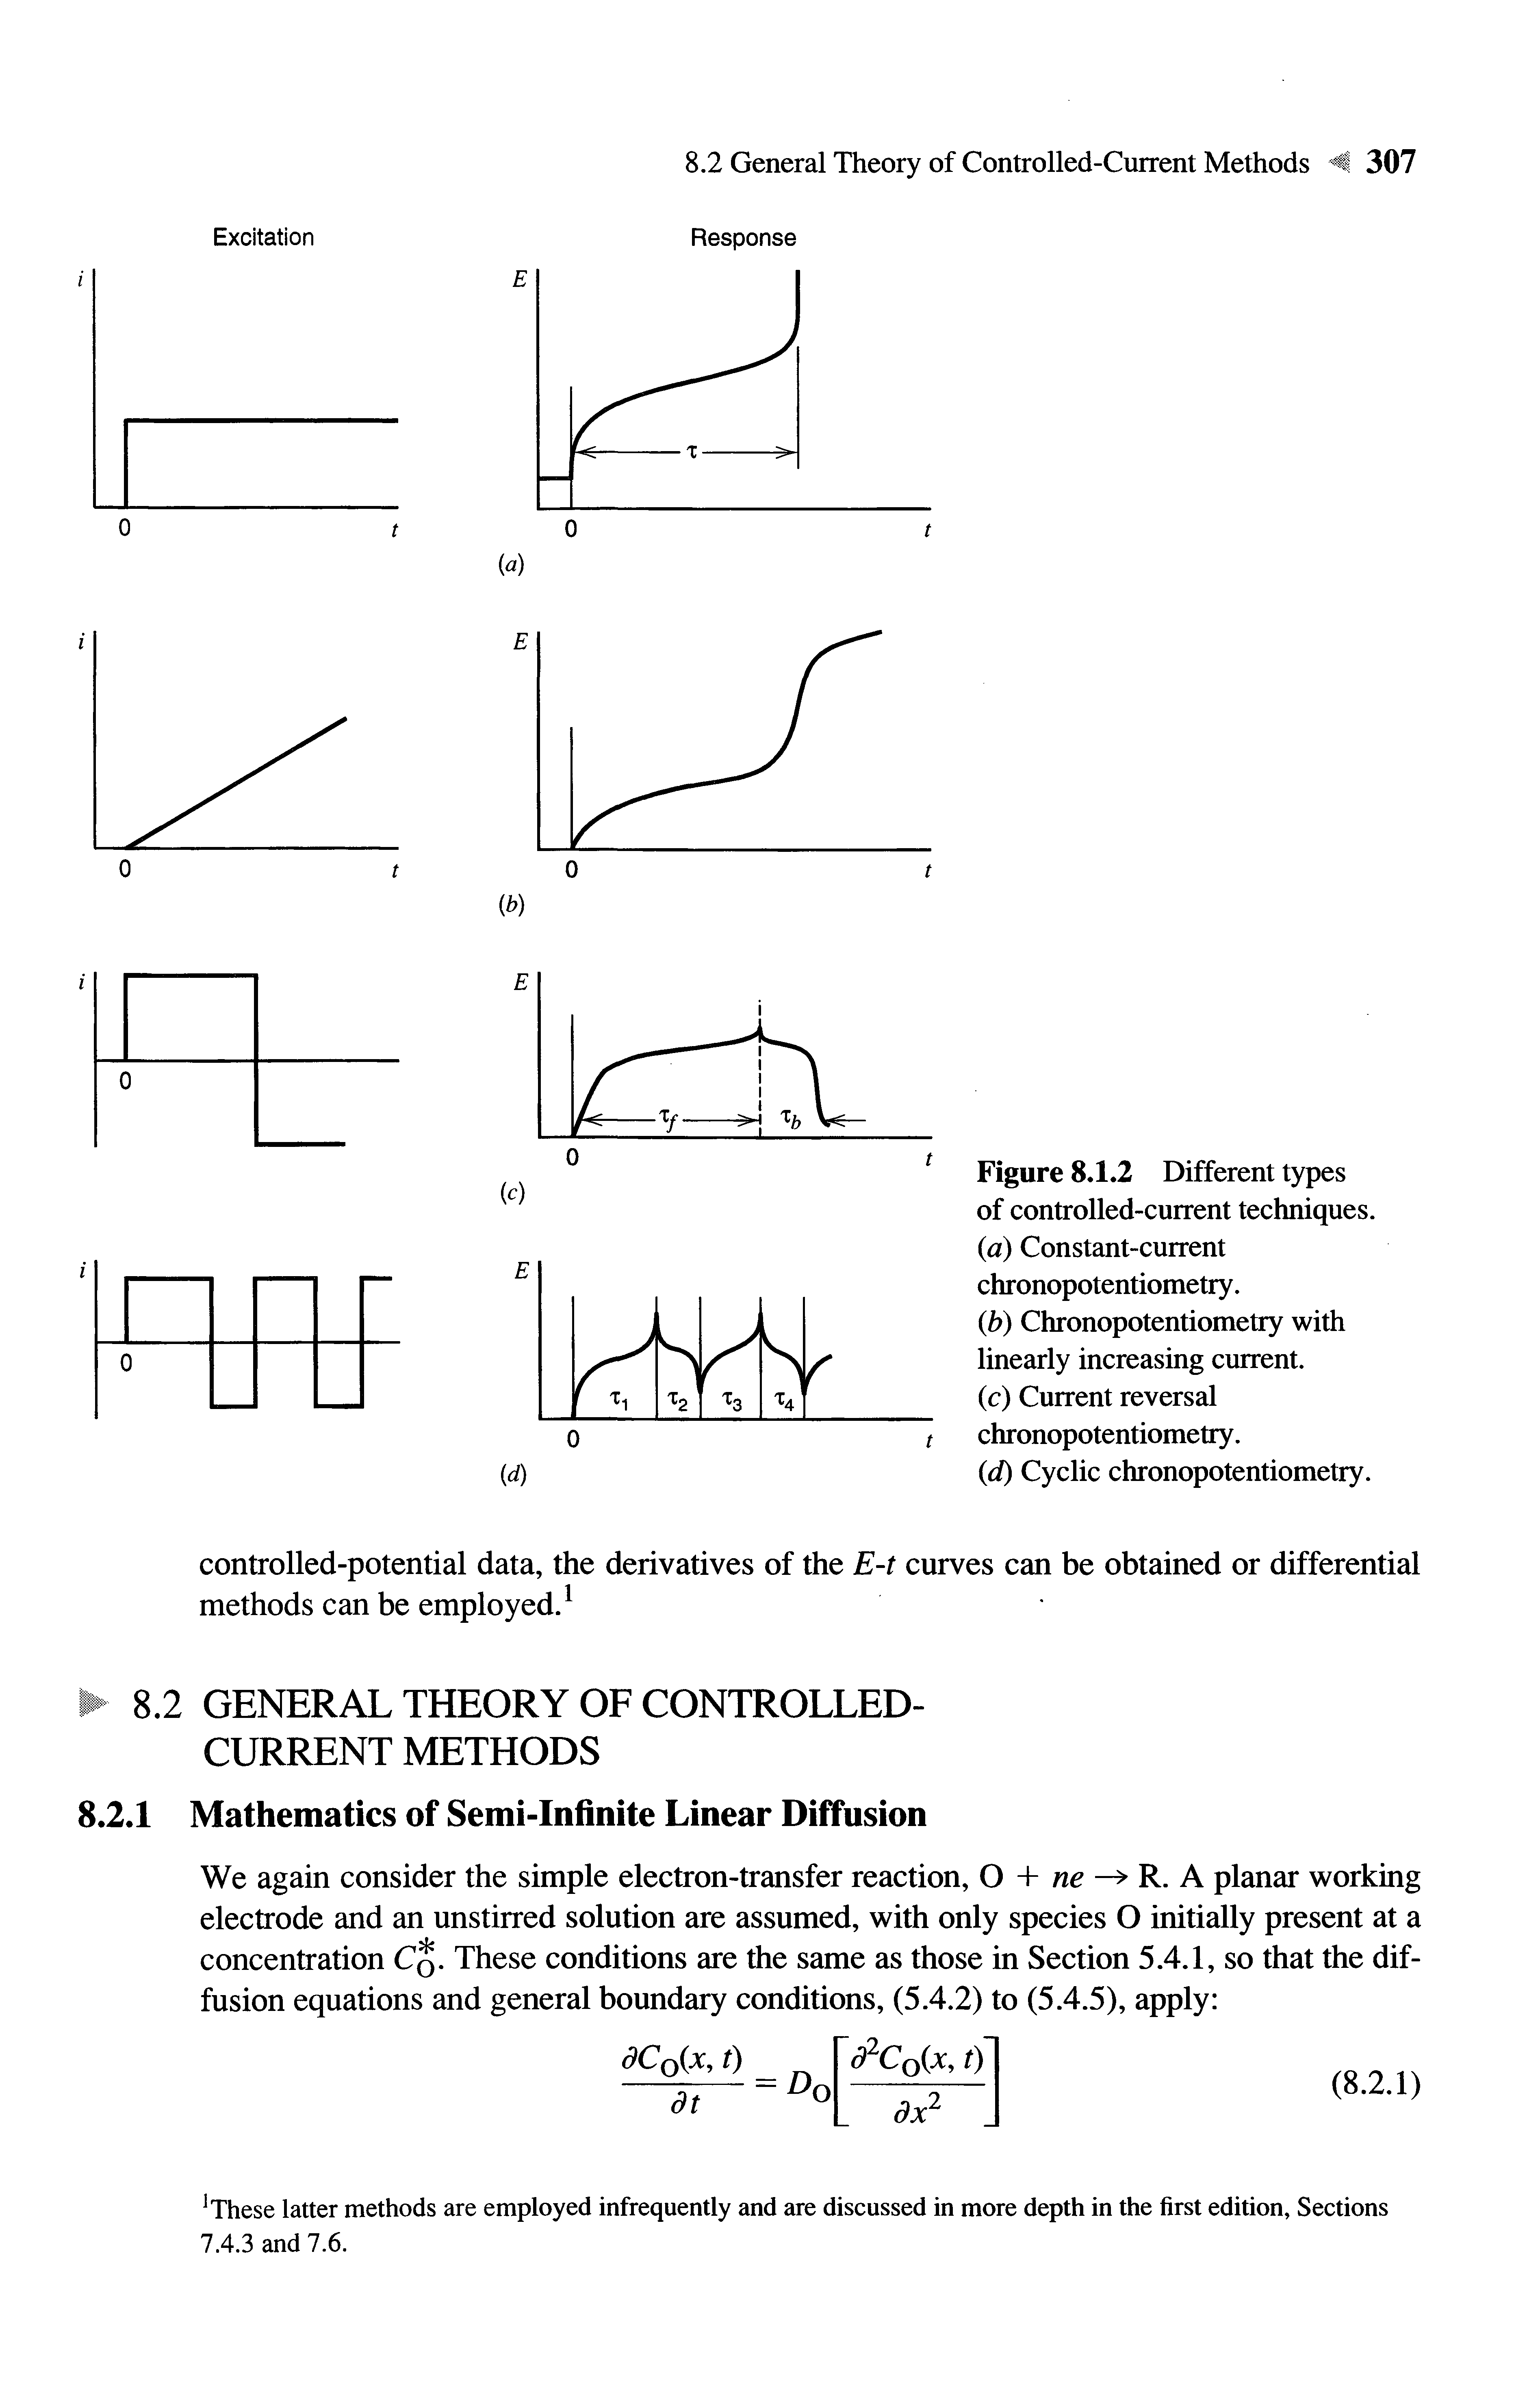 Figure 8.1.2 Different types of controlled-current techniques.